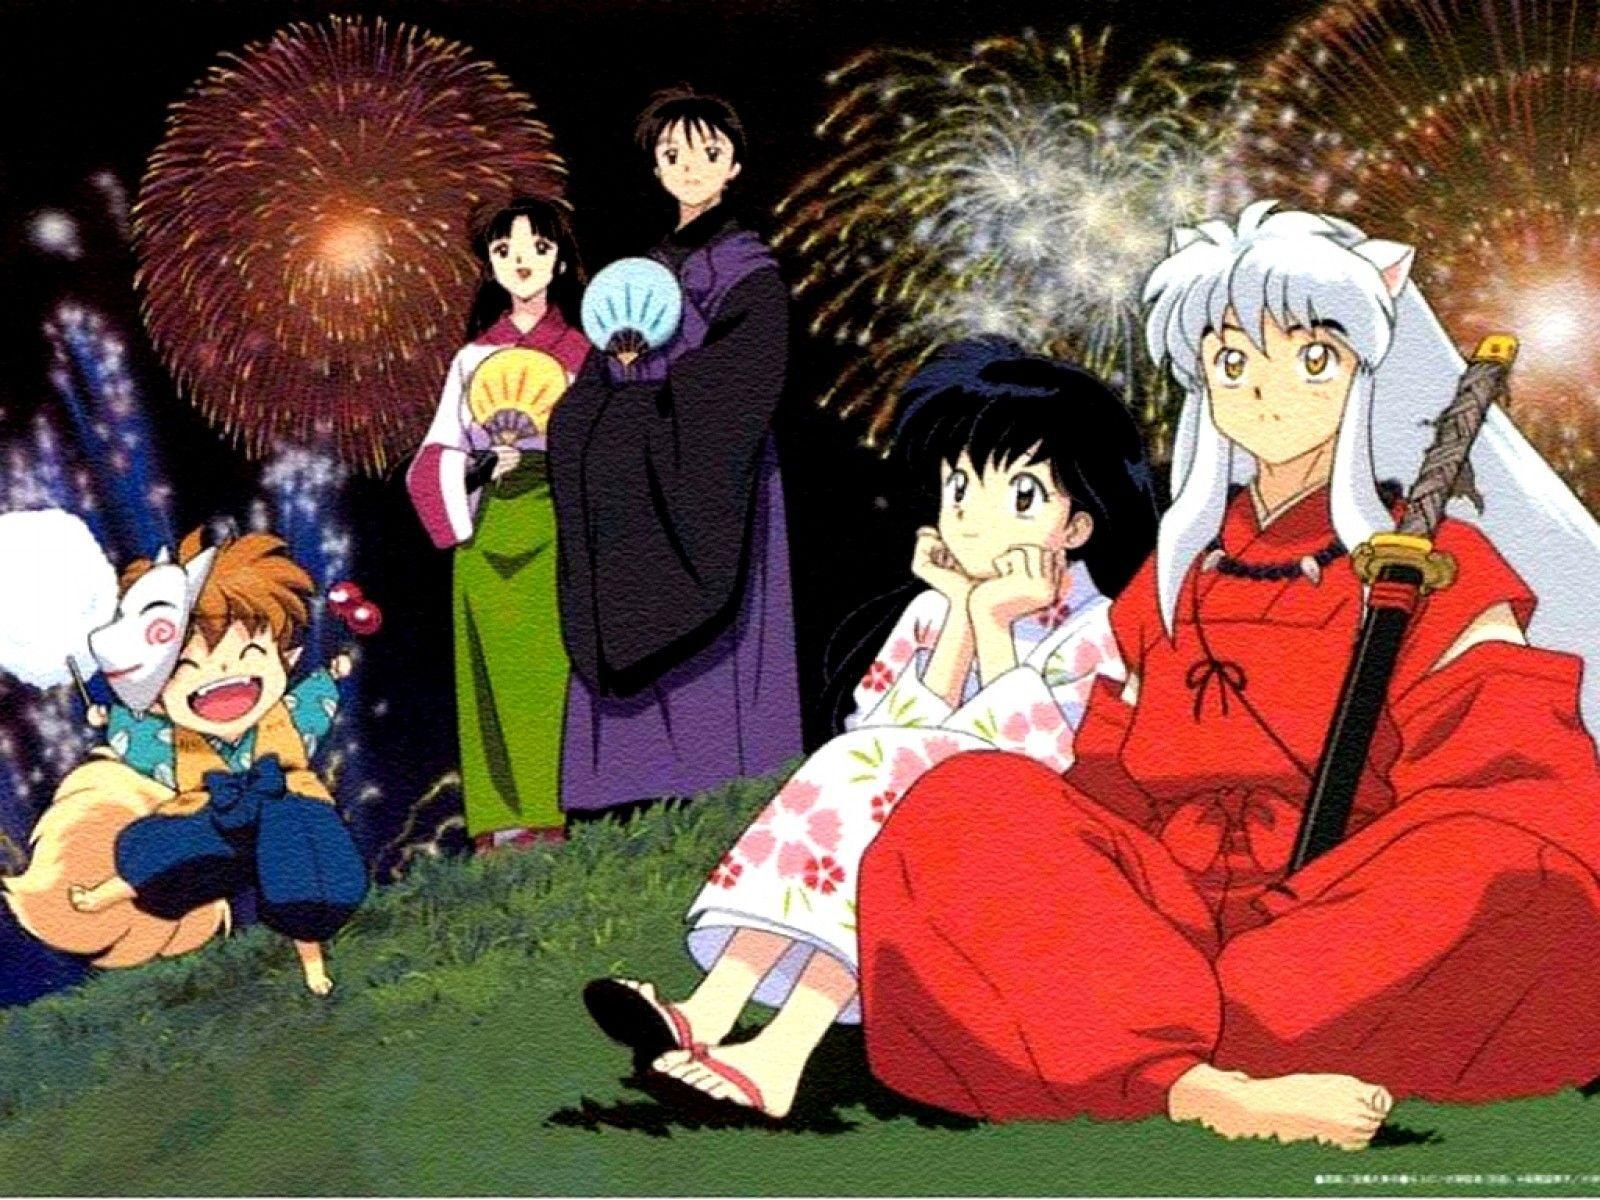 Inuyasha, Kagome, & their friends from Inuyasha